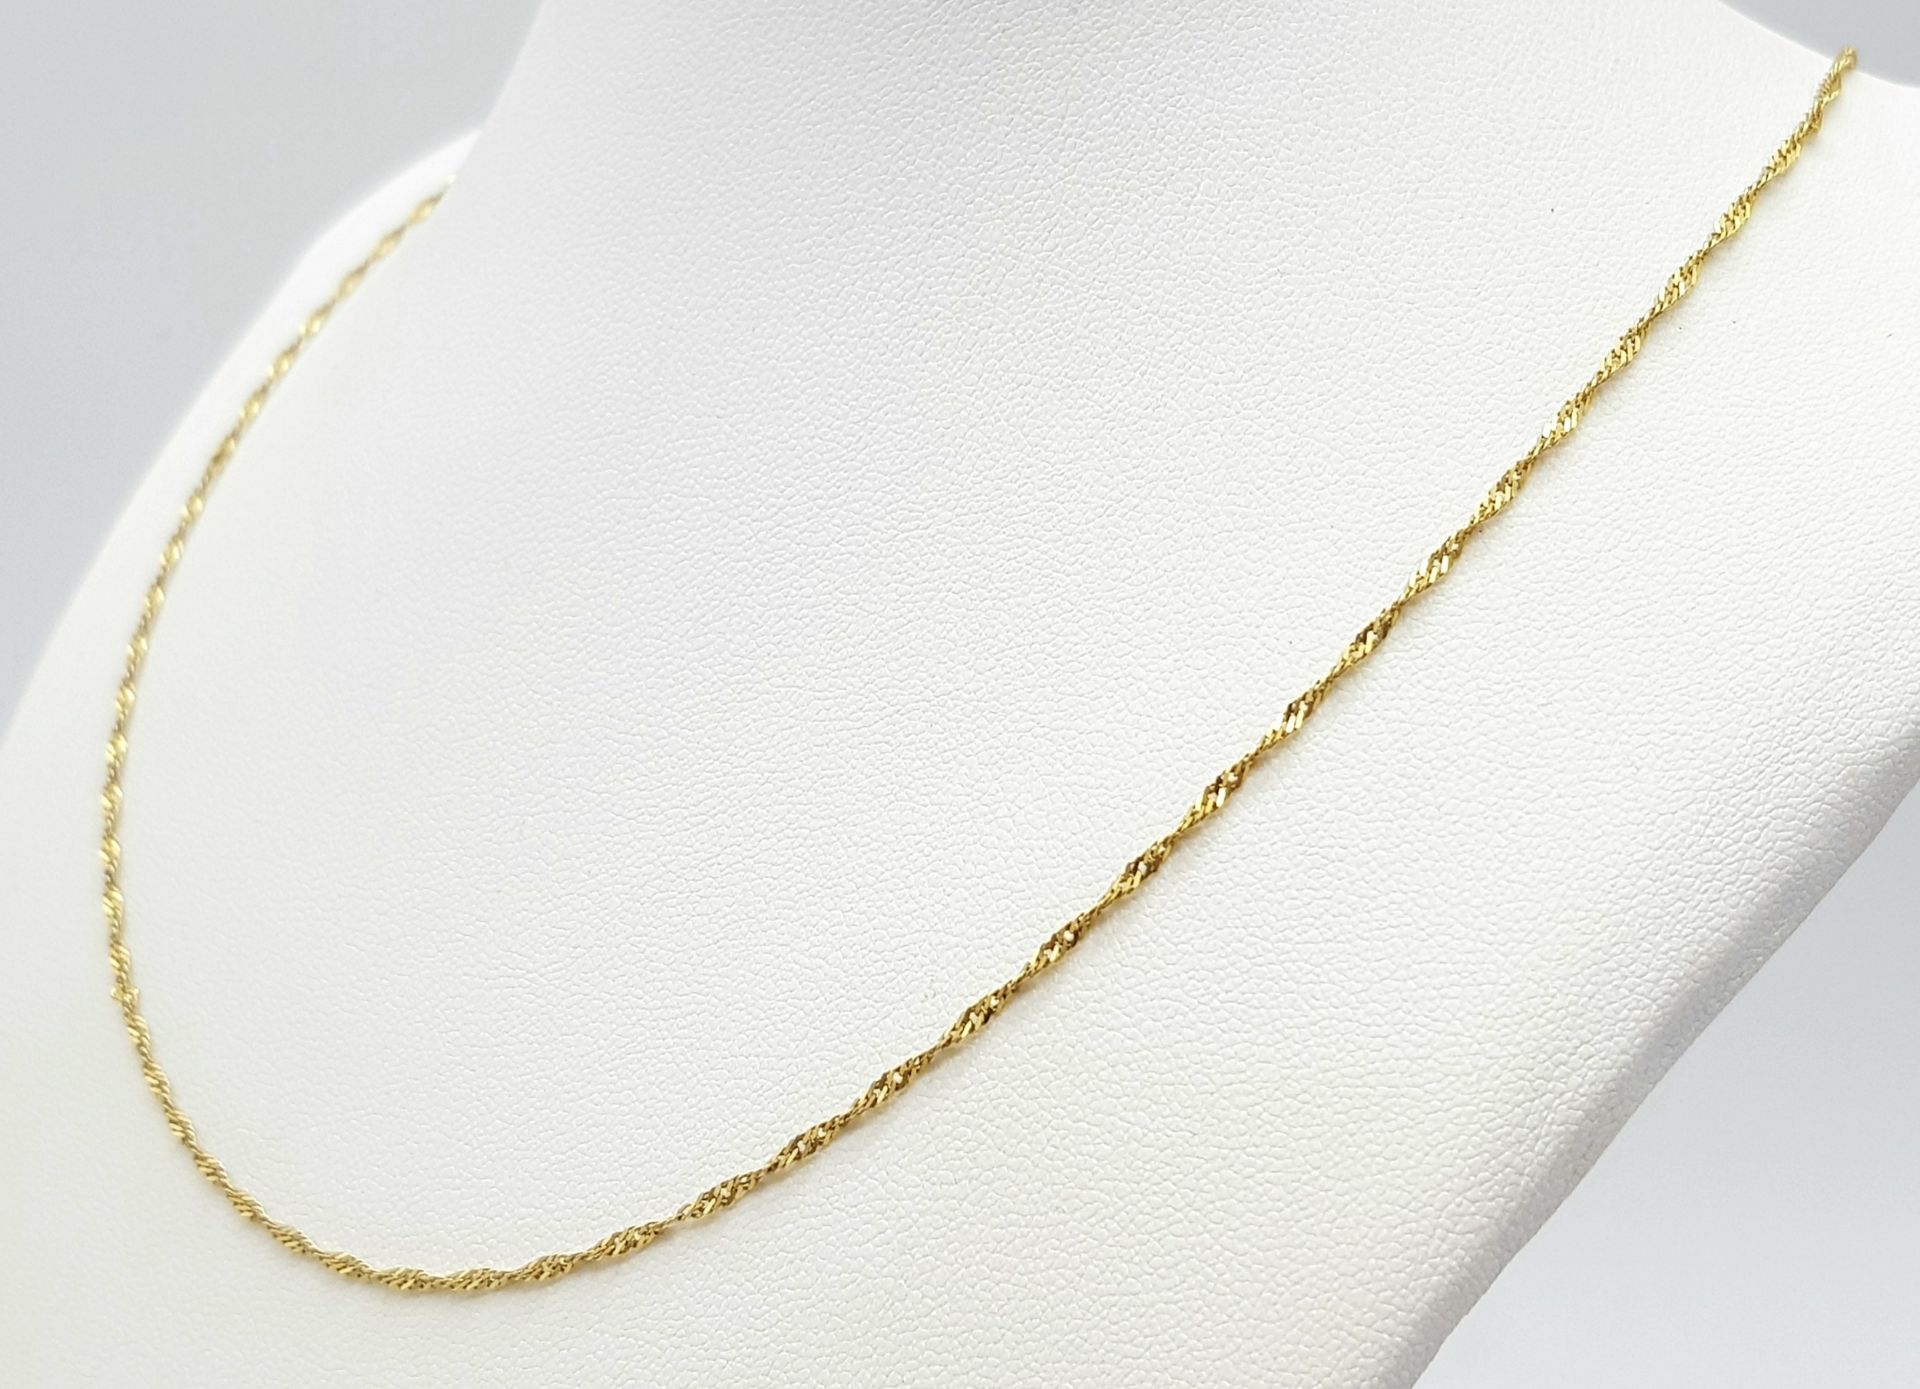 A 9K Yellow Gold Small Twist Curb Link Necklace. 44cm. 1.75g - Image 3 of 5